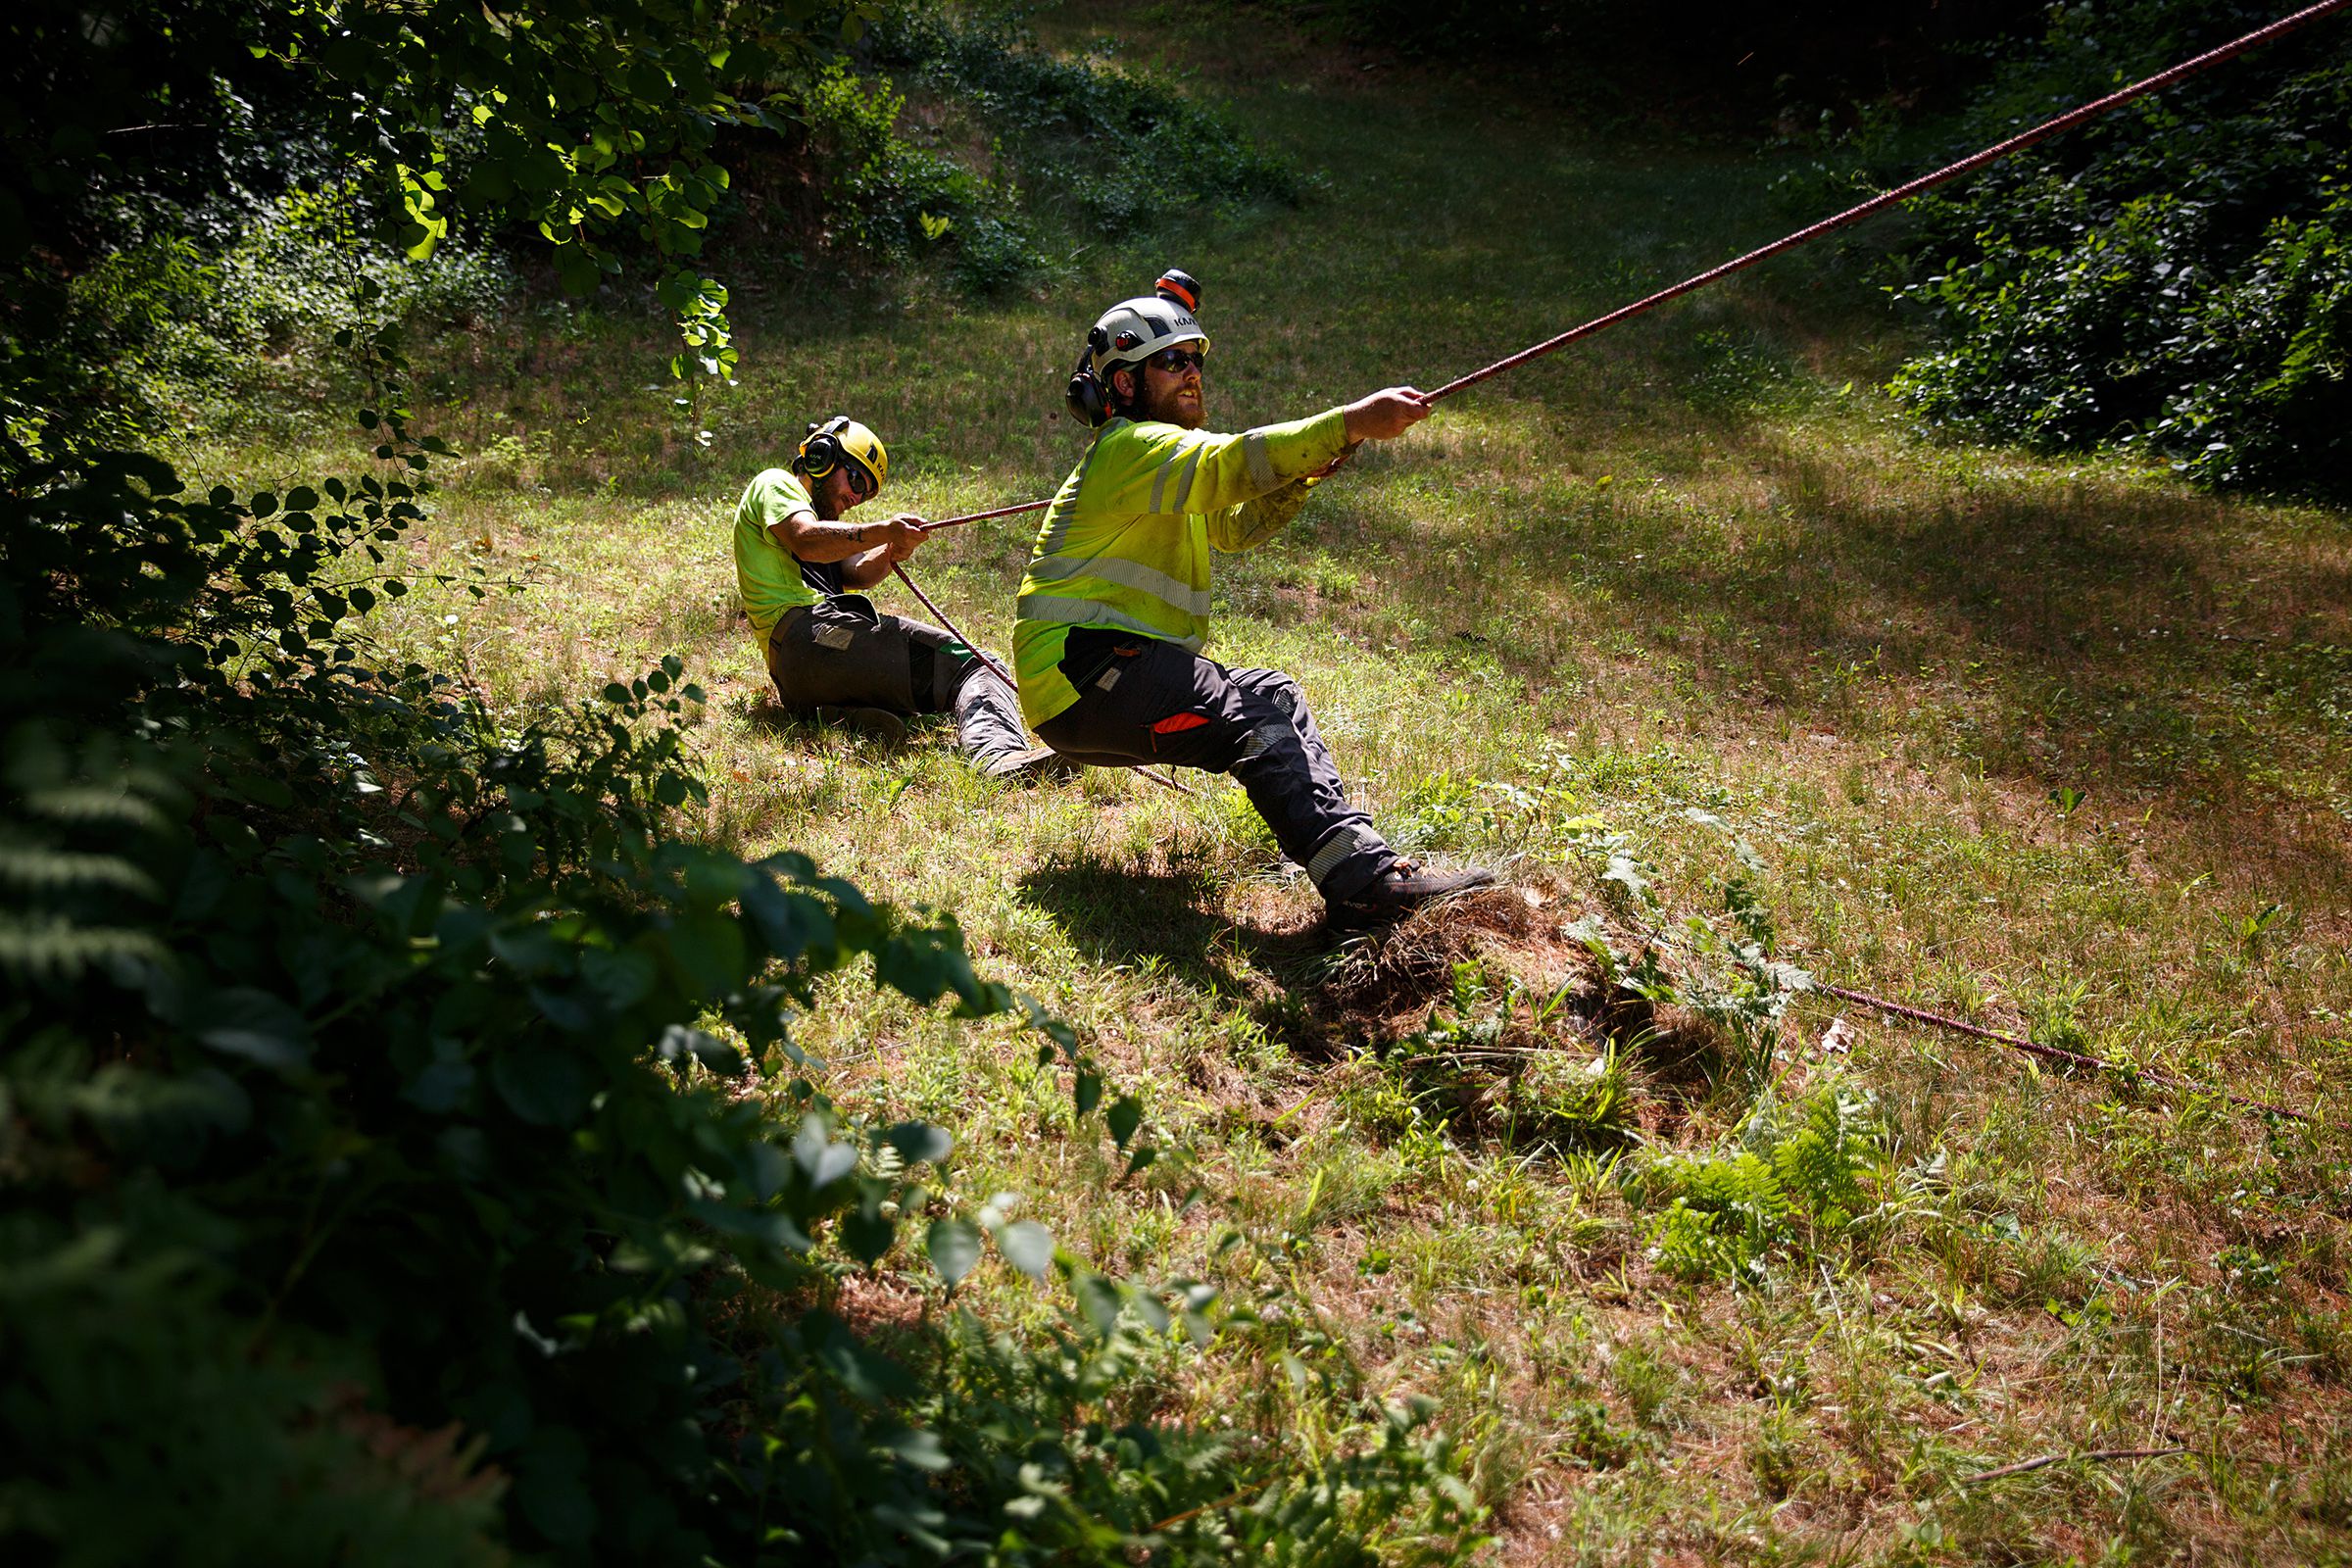 Logan Shank, left, of Springfield, N.H., and Nathaniel Moore, of Canaan, N.H., pull on a rope tied to a tree as they remove it at a home in Hanover, N.H., on Wednesday, June 30, 2021. (Valley News / Report For America - Alex Driehaus) Copyright Valley News. May not be reprinted or used online without permission. Send requests to permission@vnews.com.